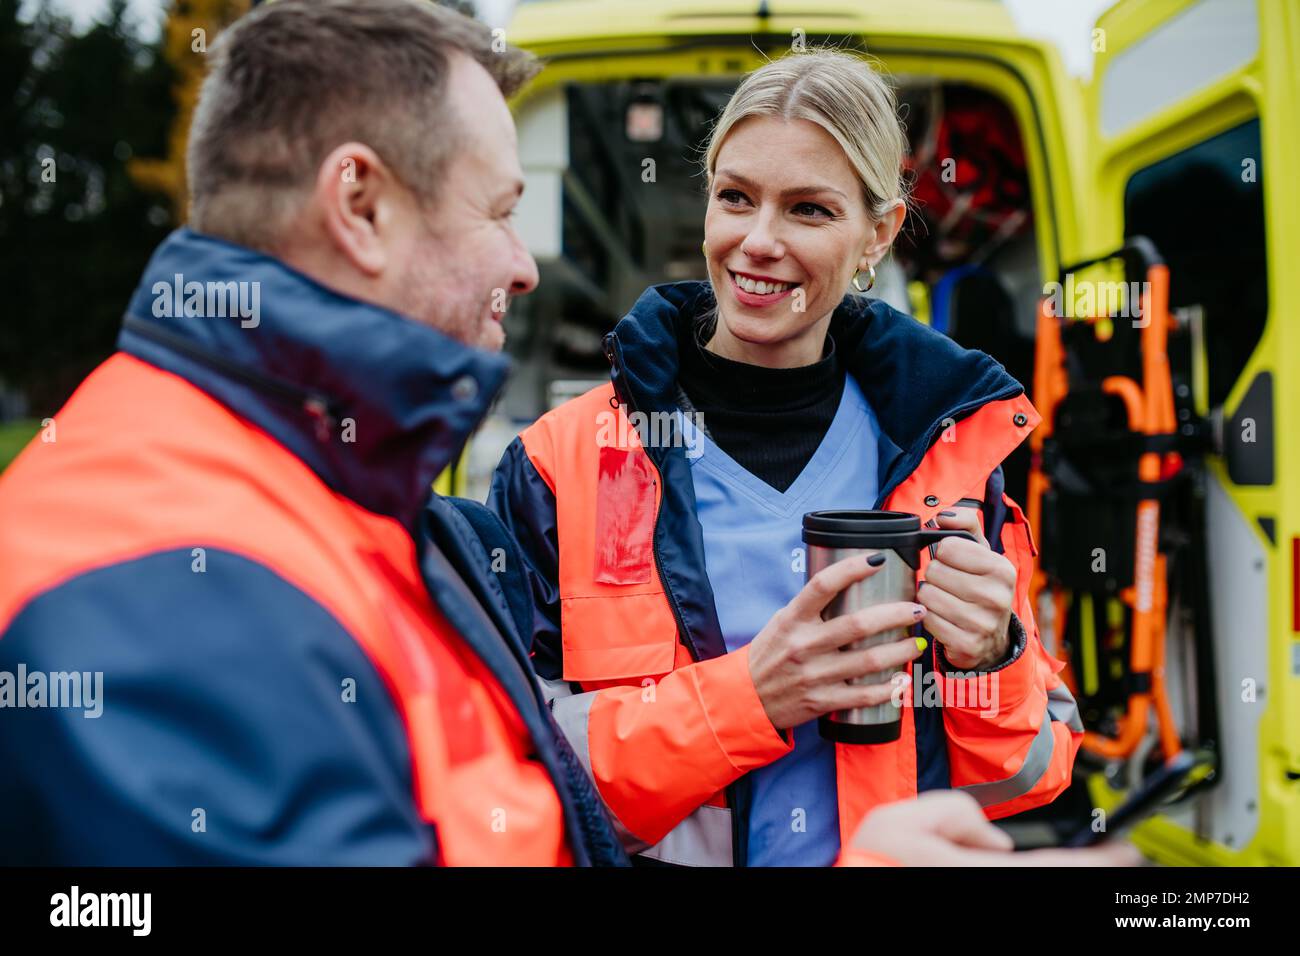 Rescuers having break in front of ambulance car, talking and drinking coffee. Stock Photo